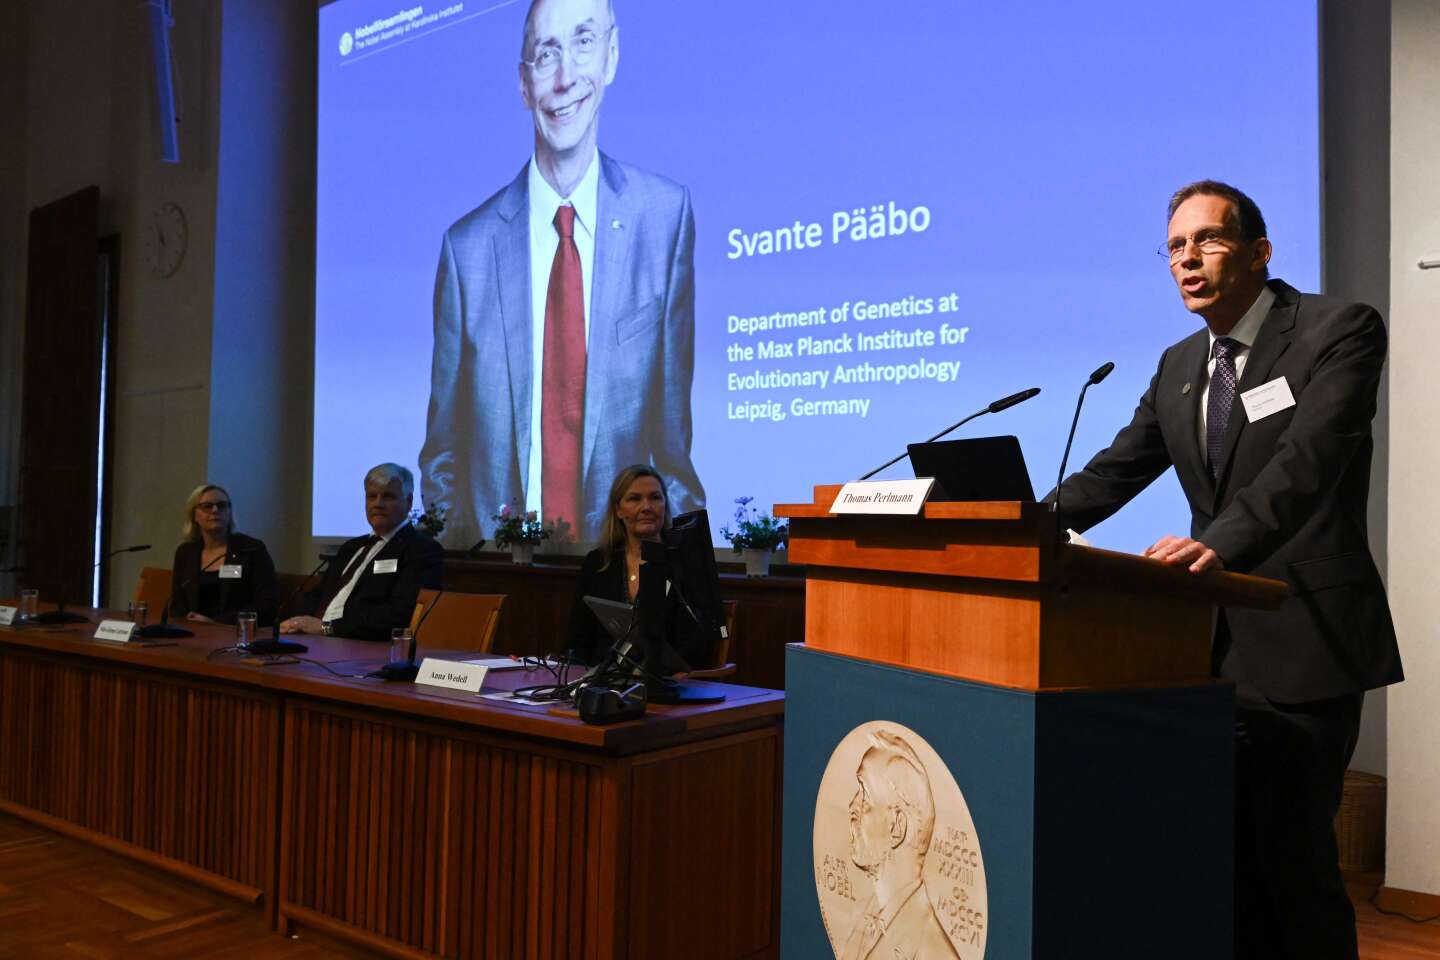 The 2022 Nobel Prize in Medicine has been awarded to Sweden’s Svante Pabo, who sequenced the genome of Neanderthal man.